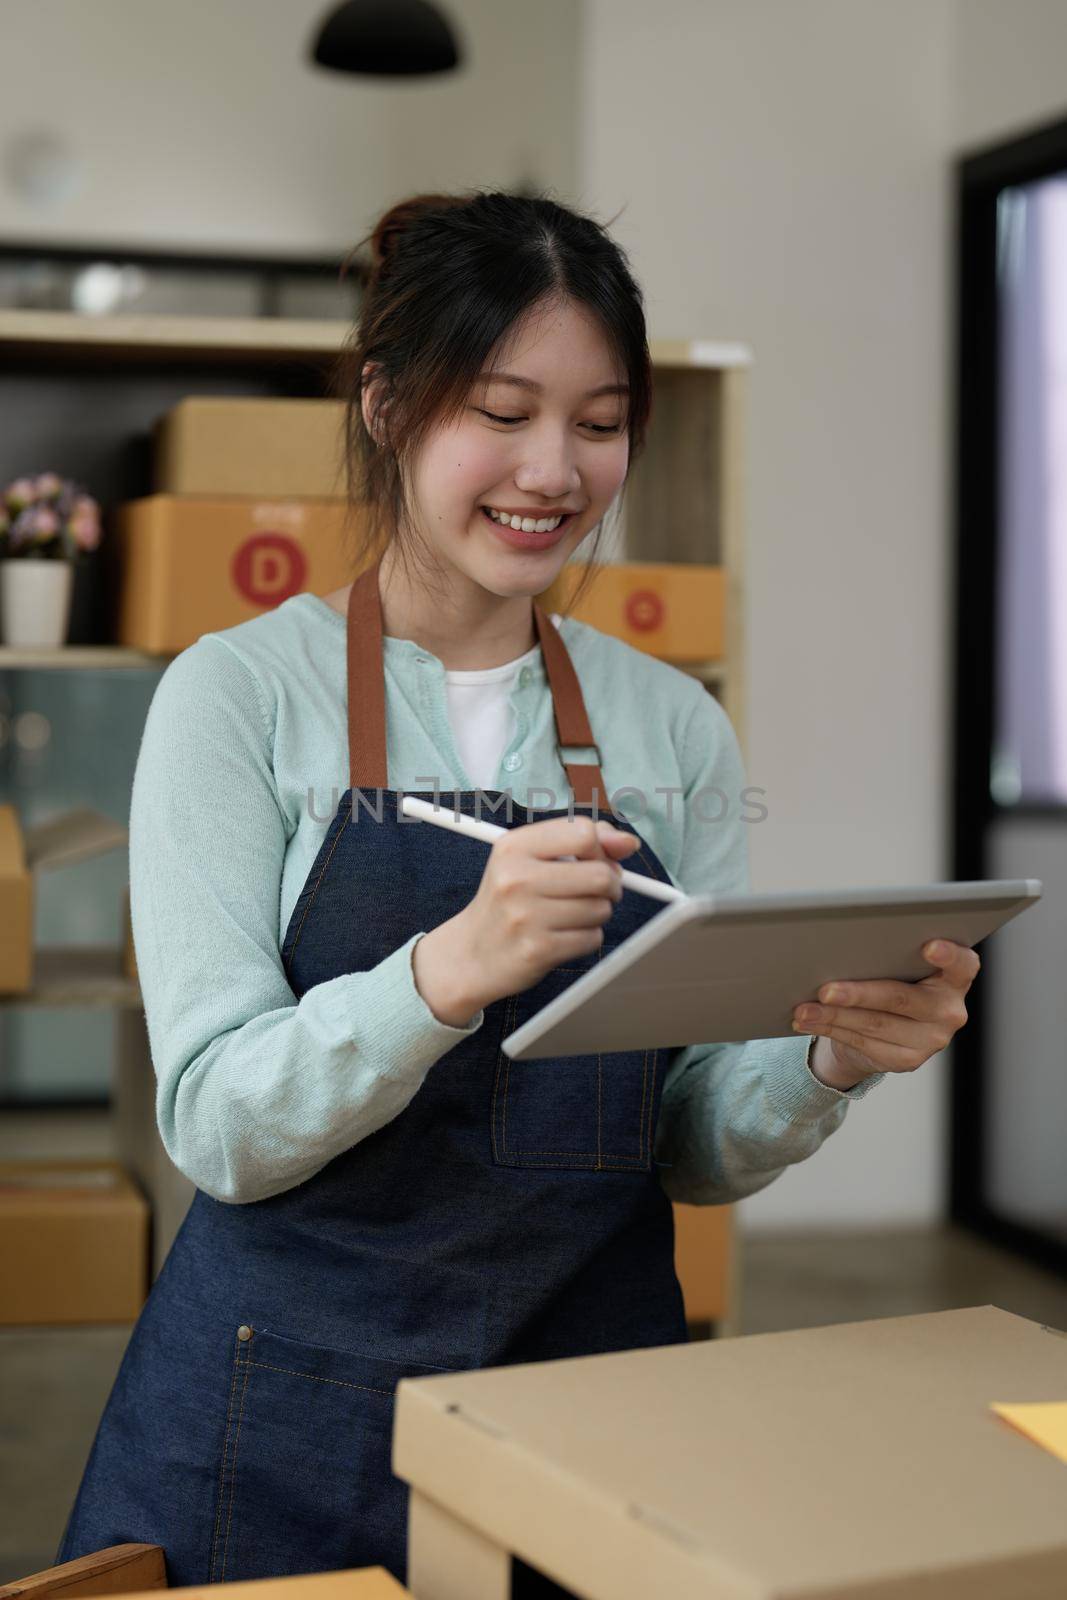 Startup small business entrepreneur SME, asian woman checking order. Portrait young Asian small business owner home office, online sell marketing delivery, SME e-commerce telemarketing concept by nateemee